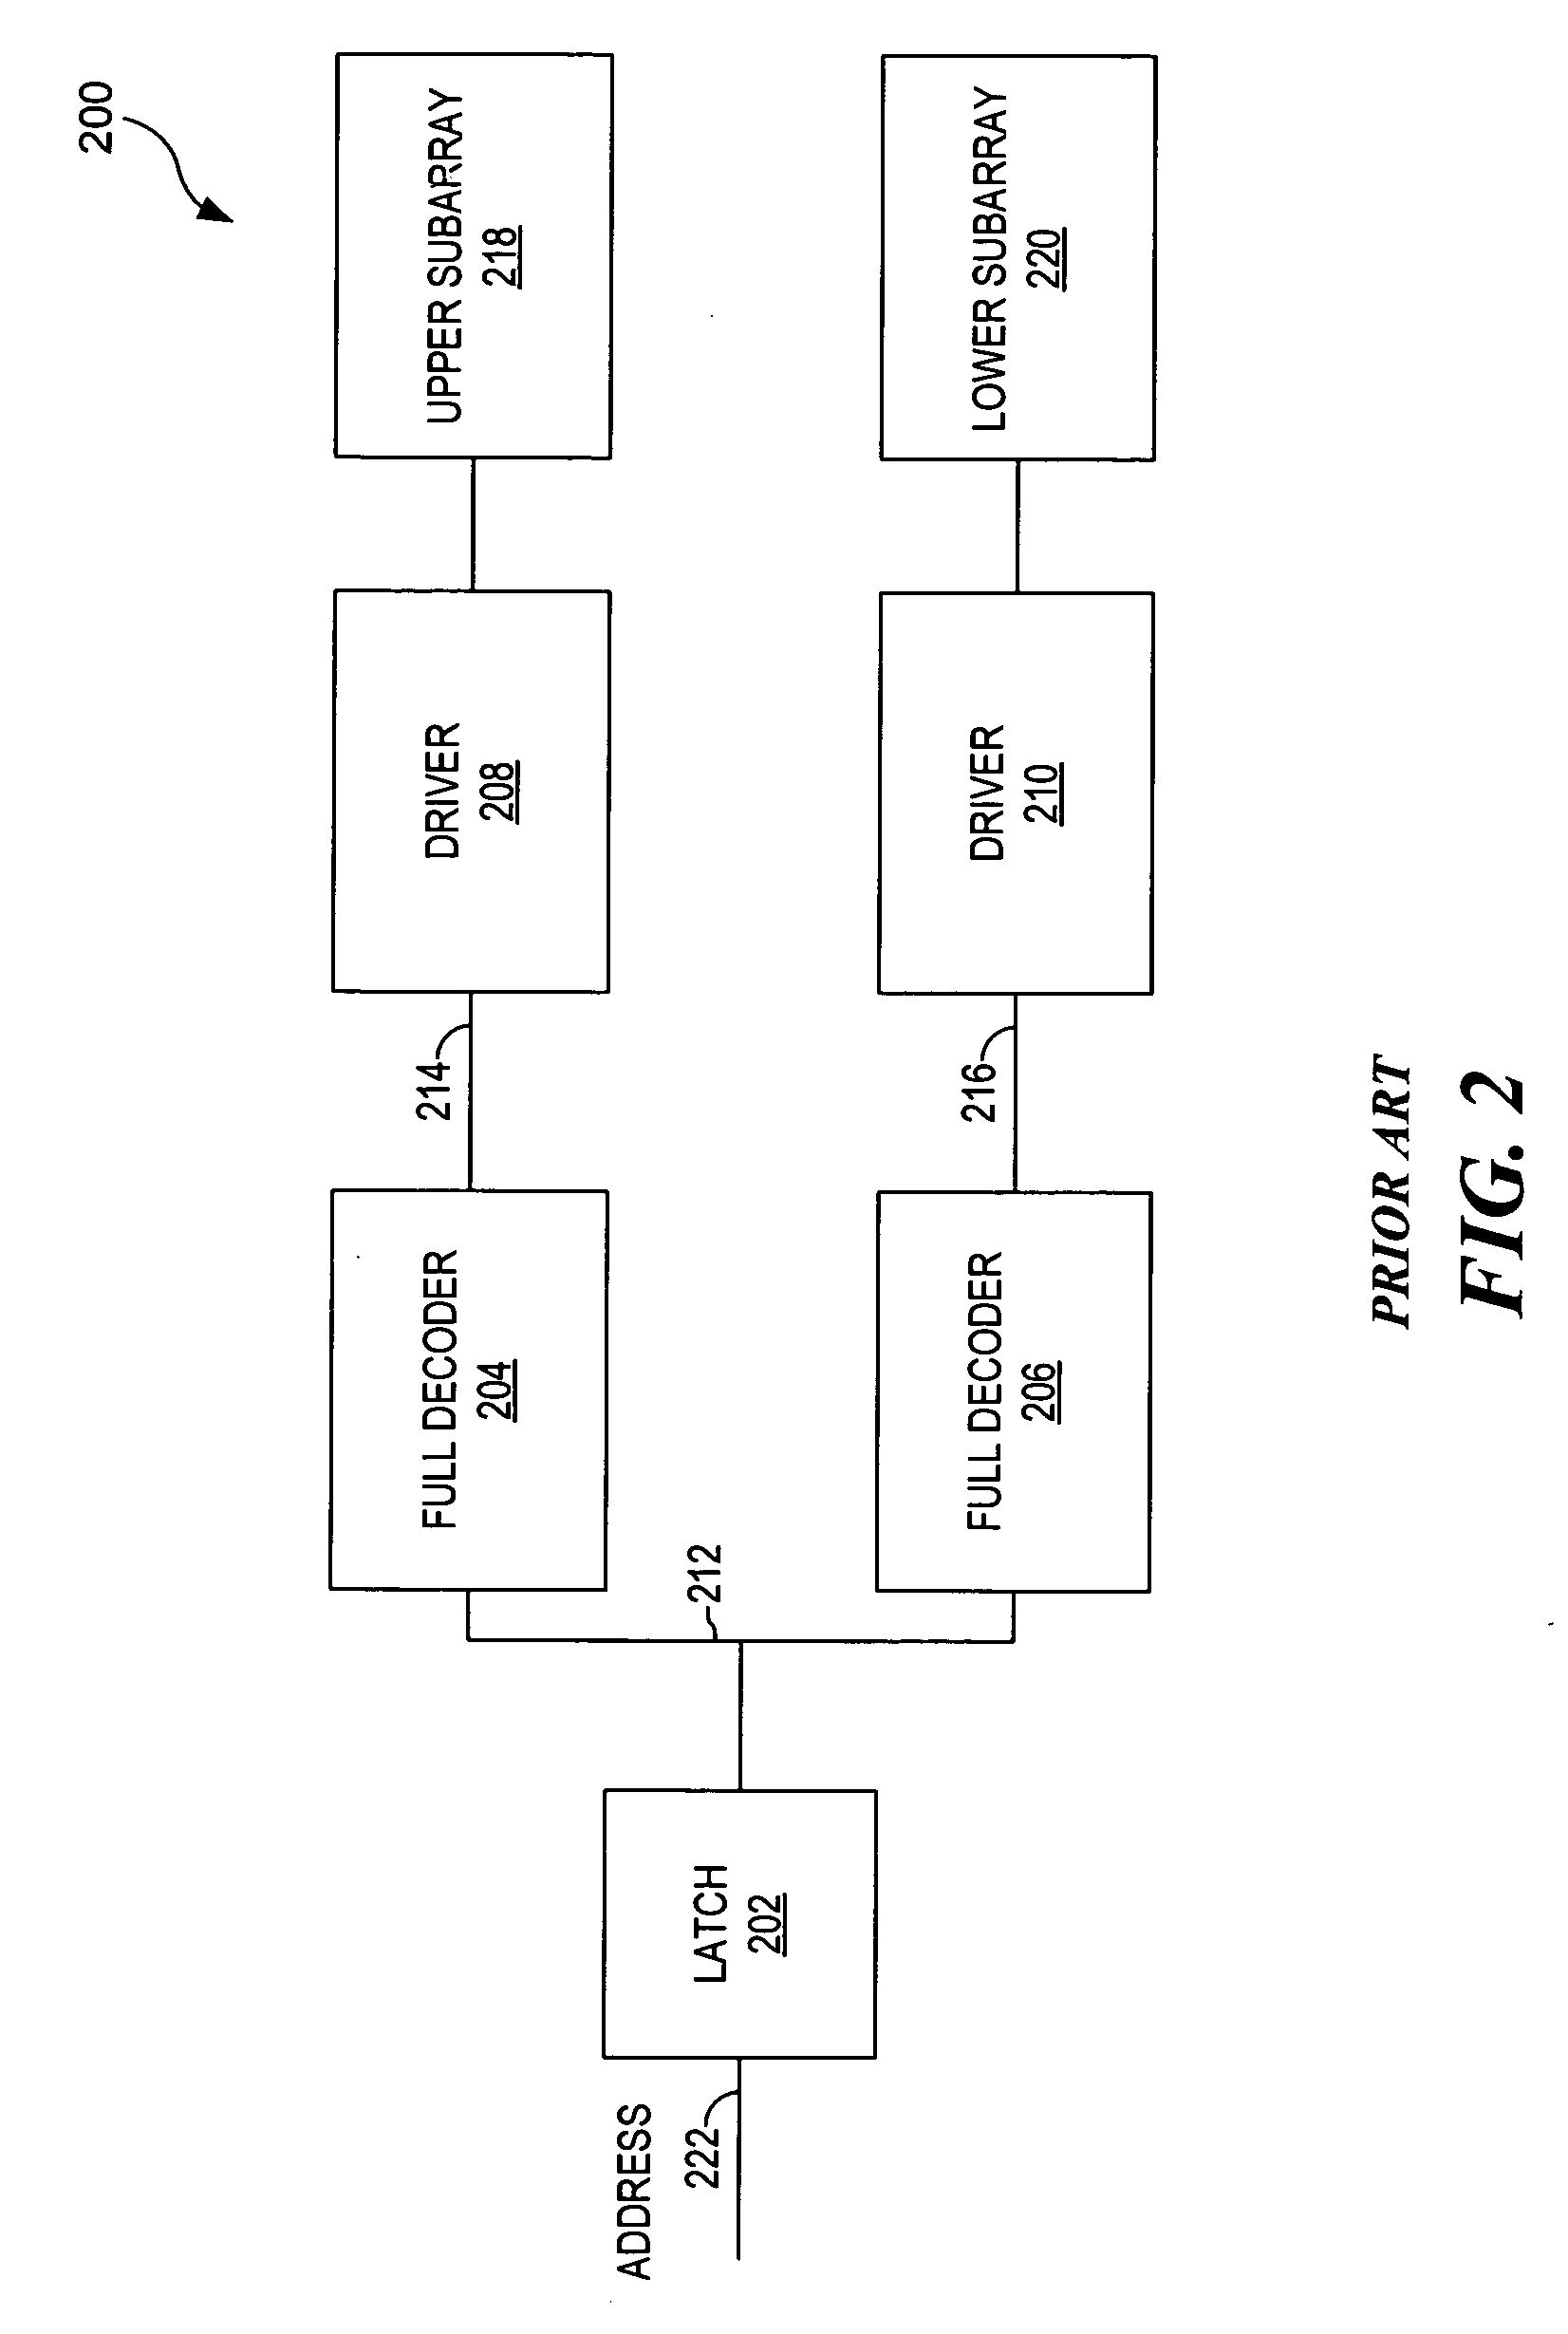 Method of address distribution time reduction for high speed memory macro